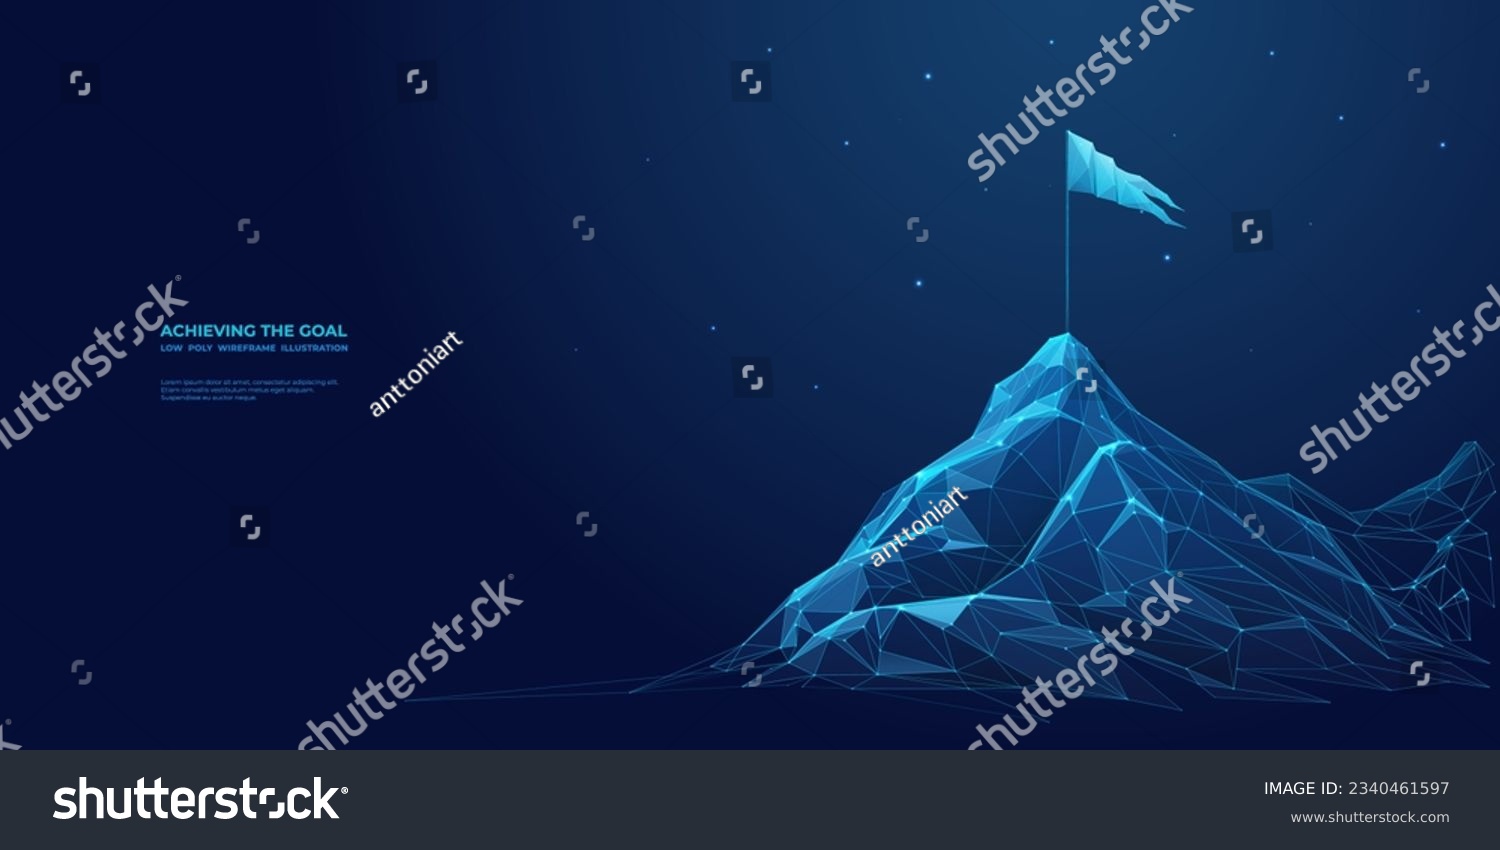  Abstract flag on the top of the Mountain. The digital conception of achieving the goal form lines, and connected glowing dots. Low poly vector wireframe illustration on blue technology background.  #2340461597